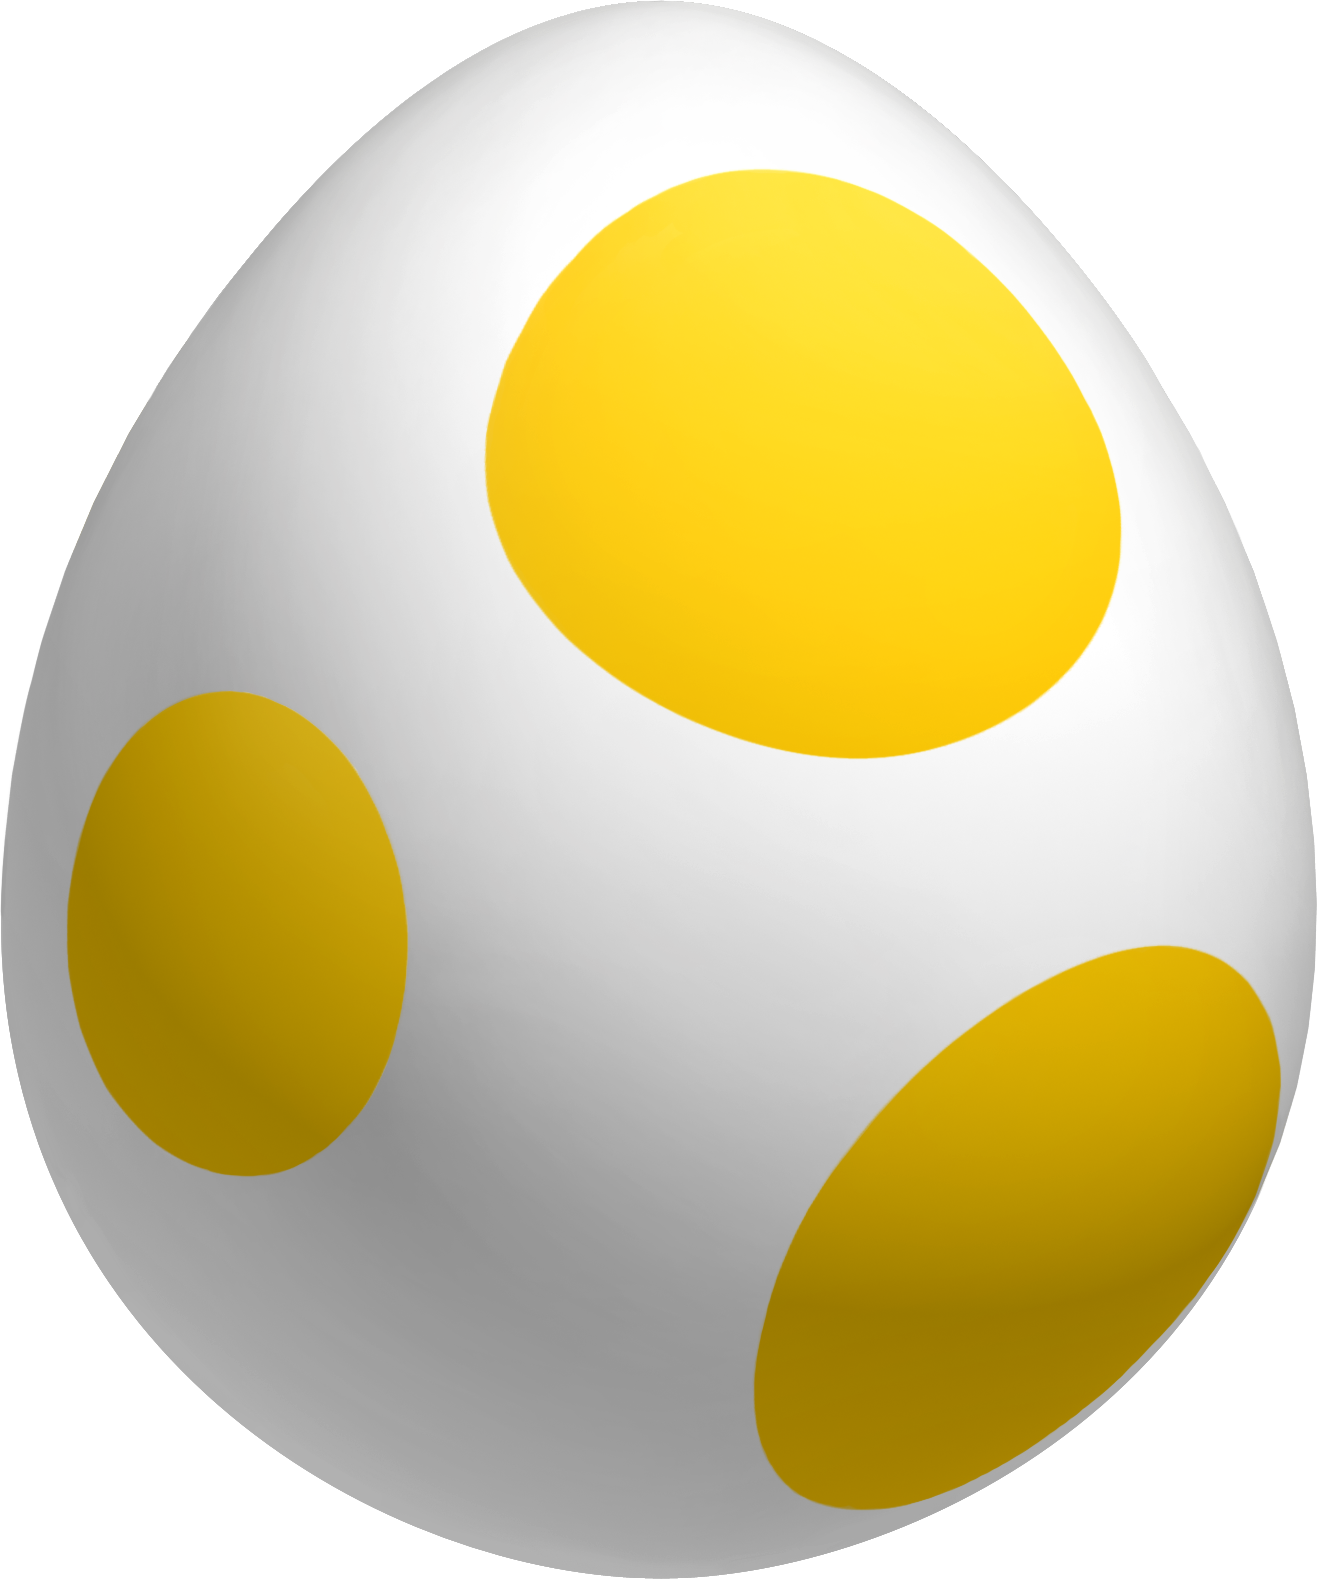 Yoshi Egg icon transparent background PNG clipart